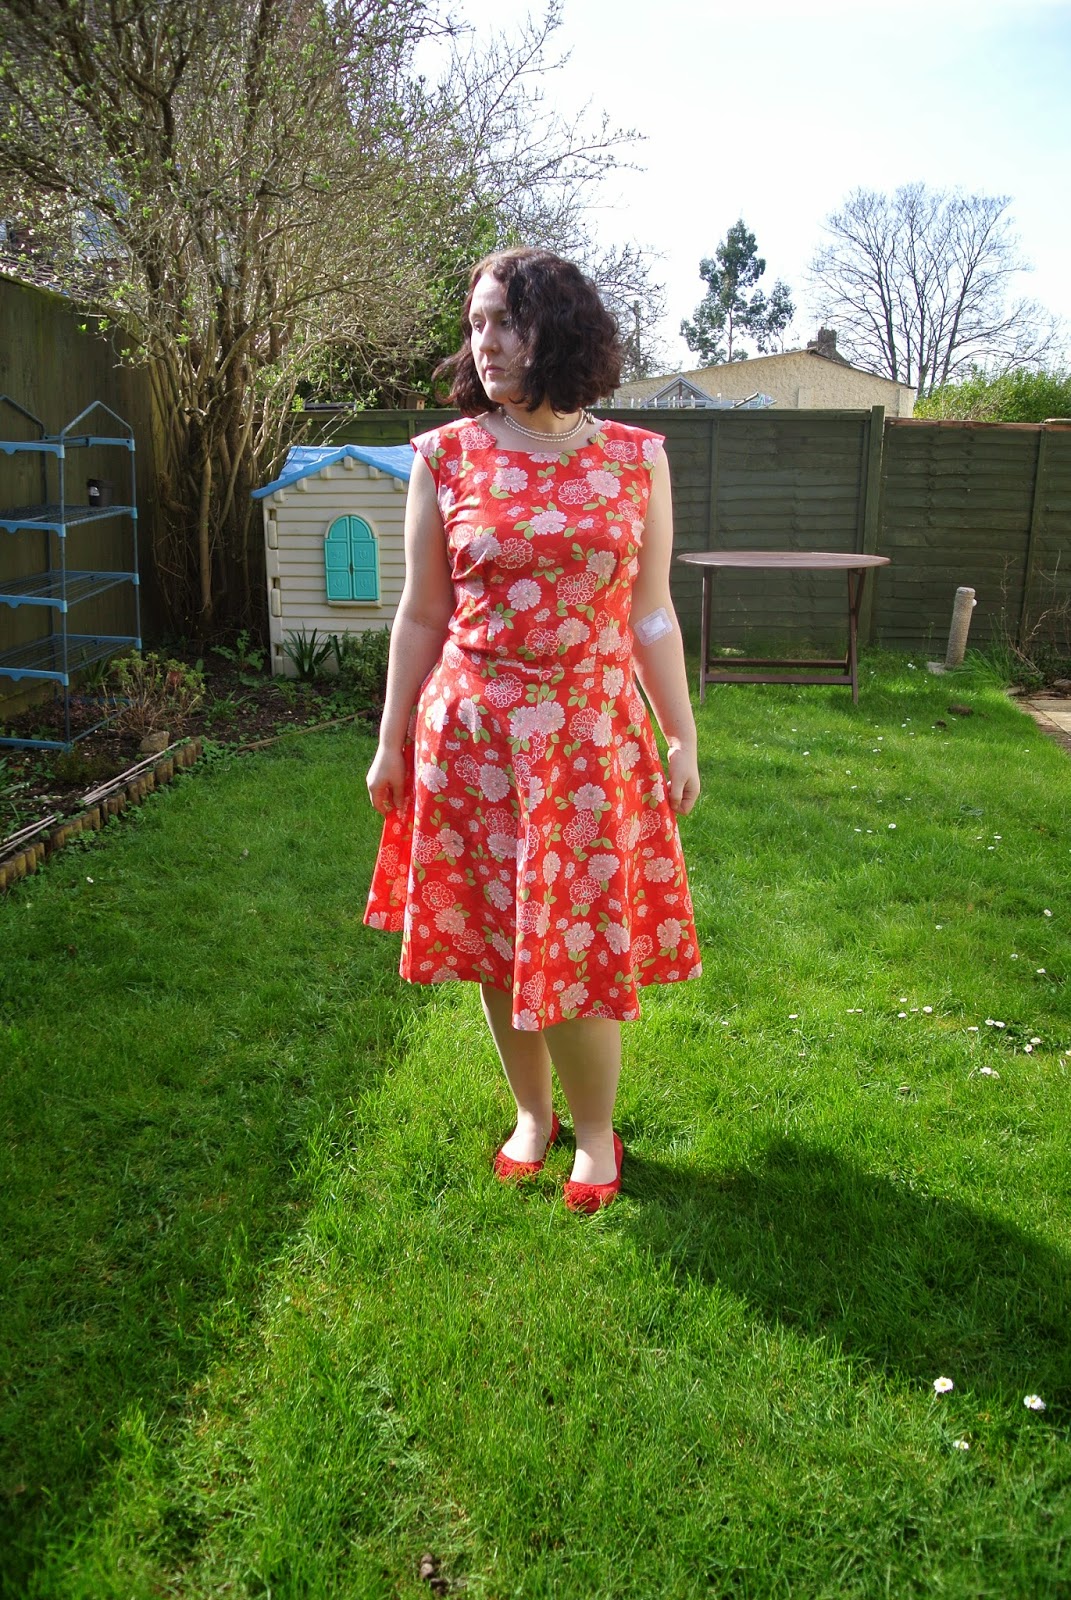 Sew little time: Mad men challenge - the Pensive Betty dress